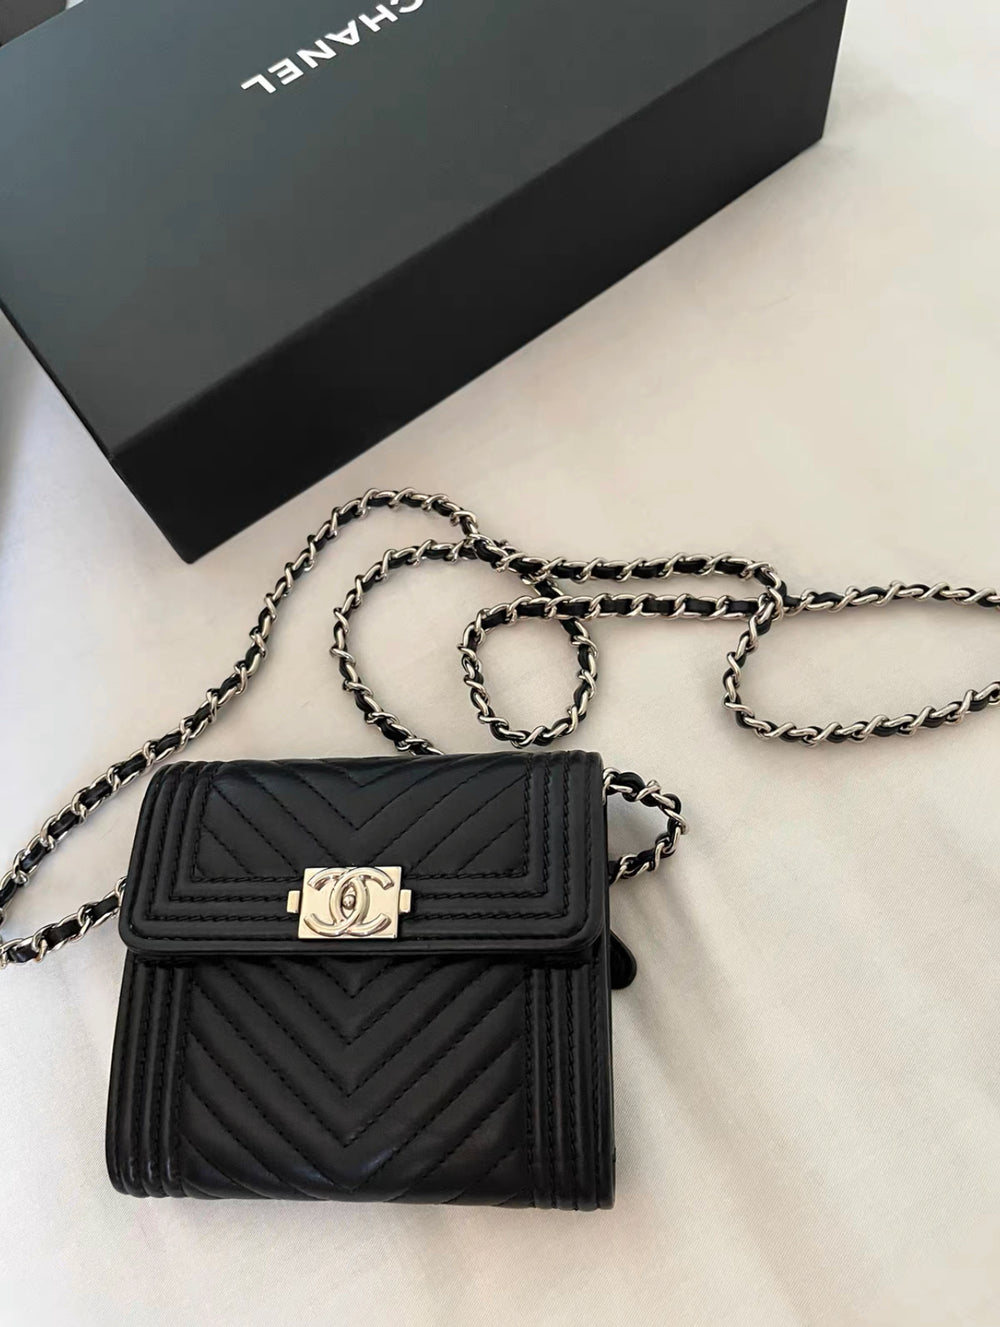 Kayla T. review of Converter Kit for Chanel Small Flap Wallet